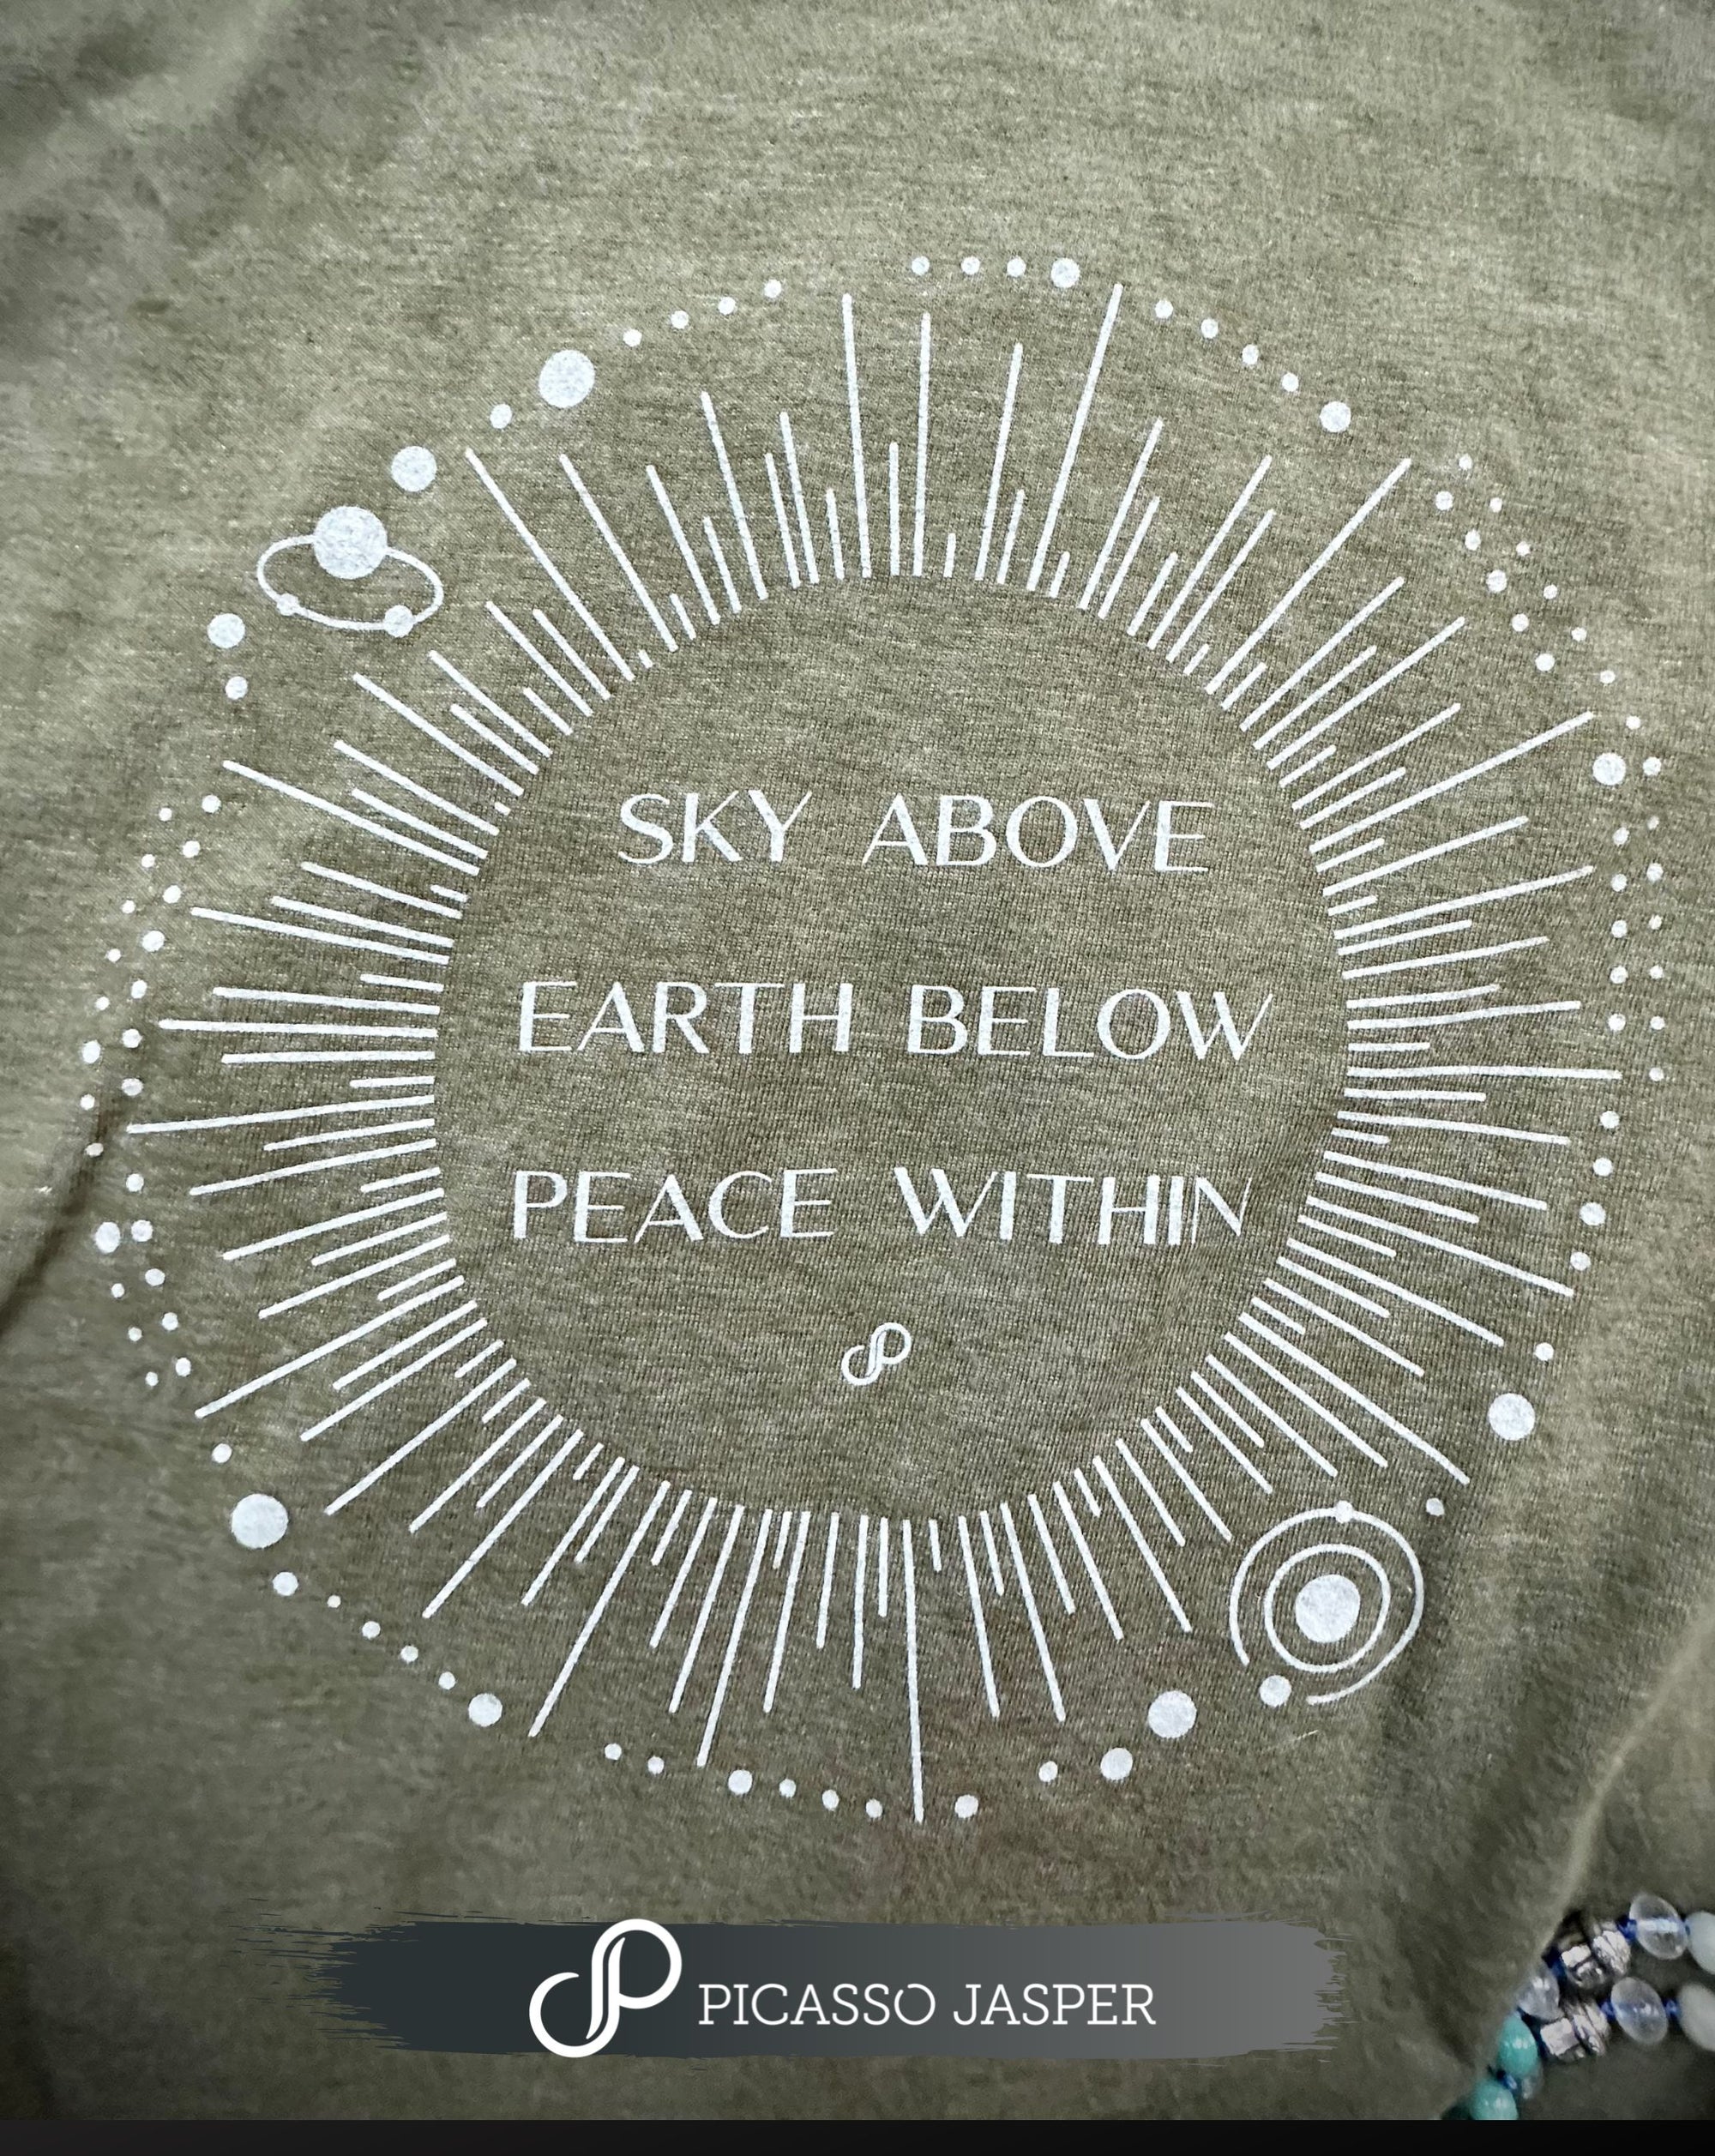 *Limited! Sky Above, Earth Below, Peace Within: Tee